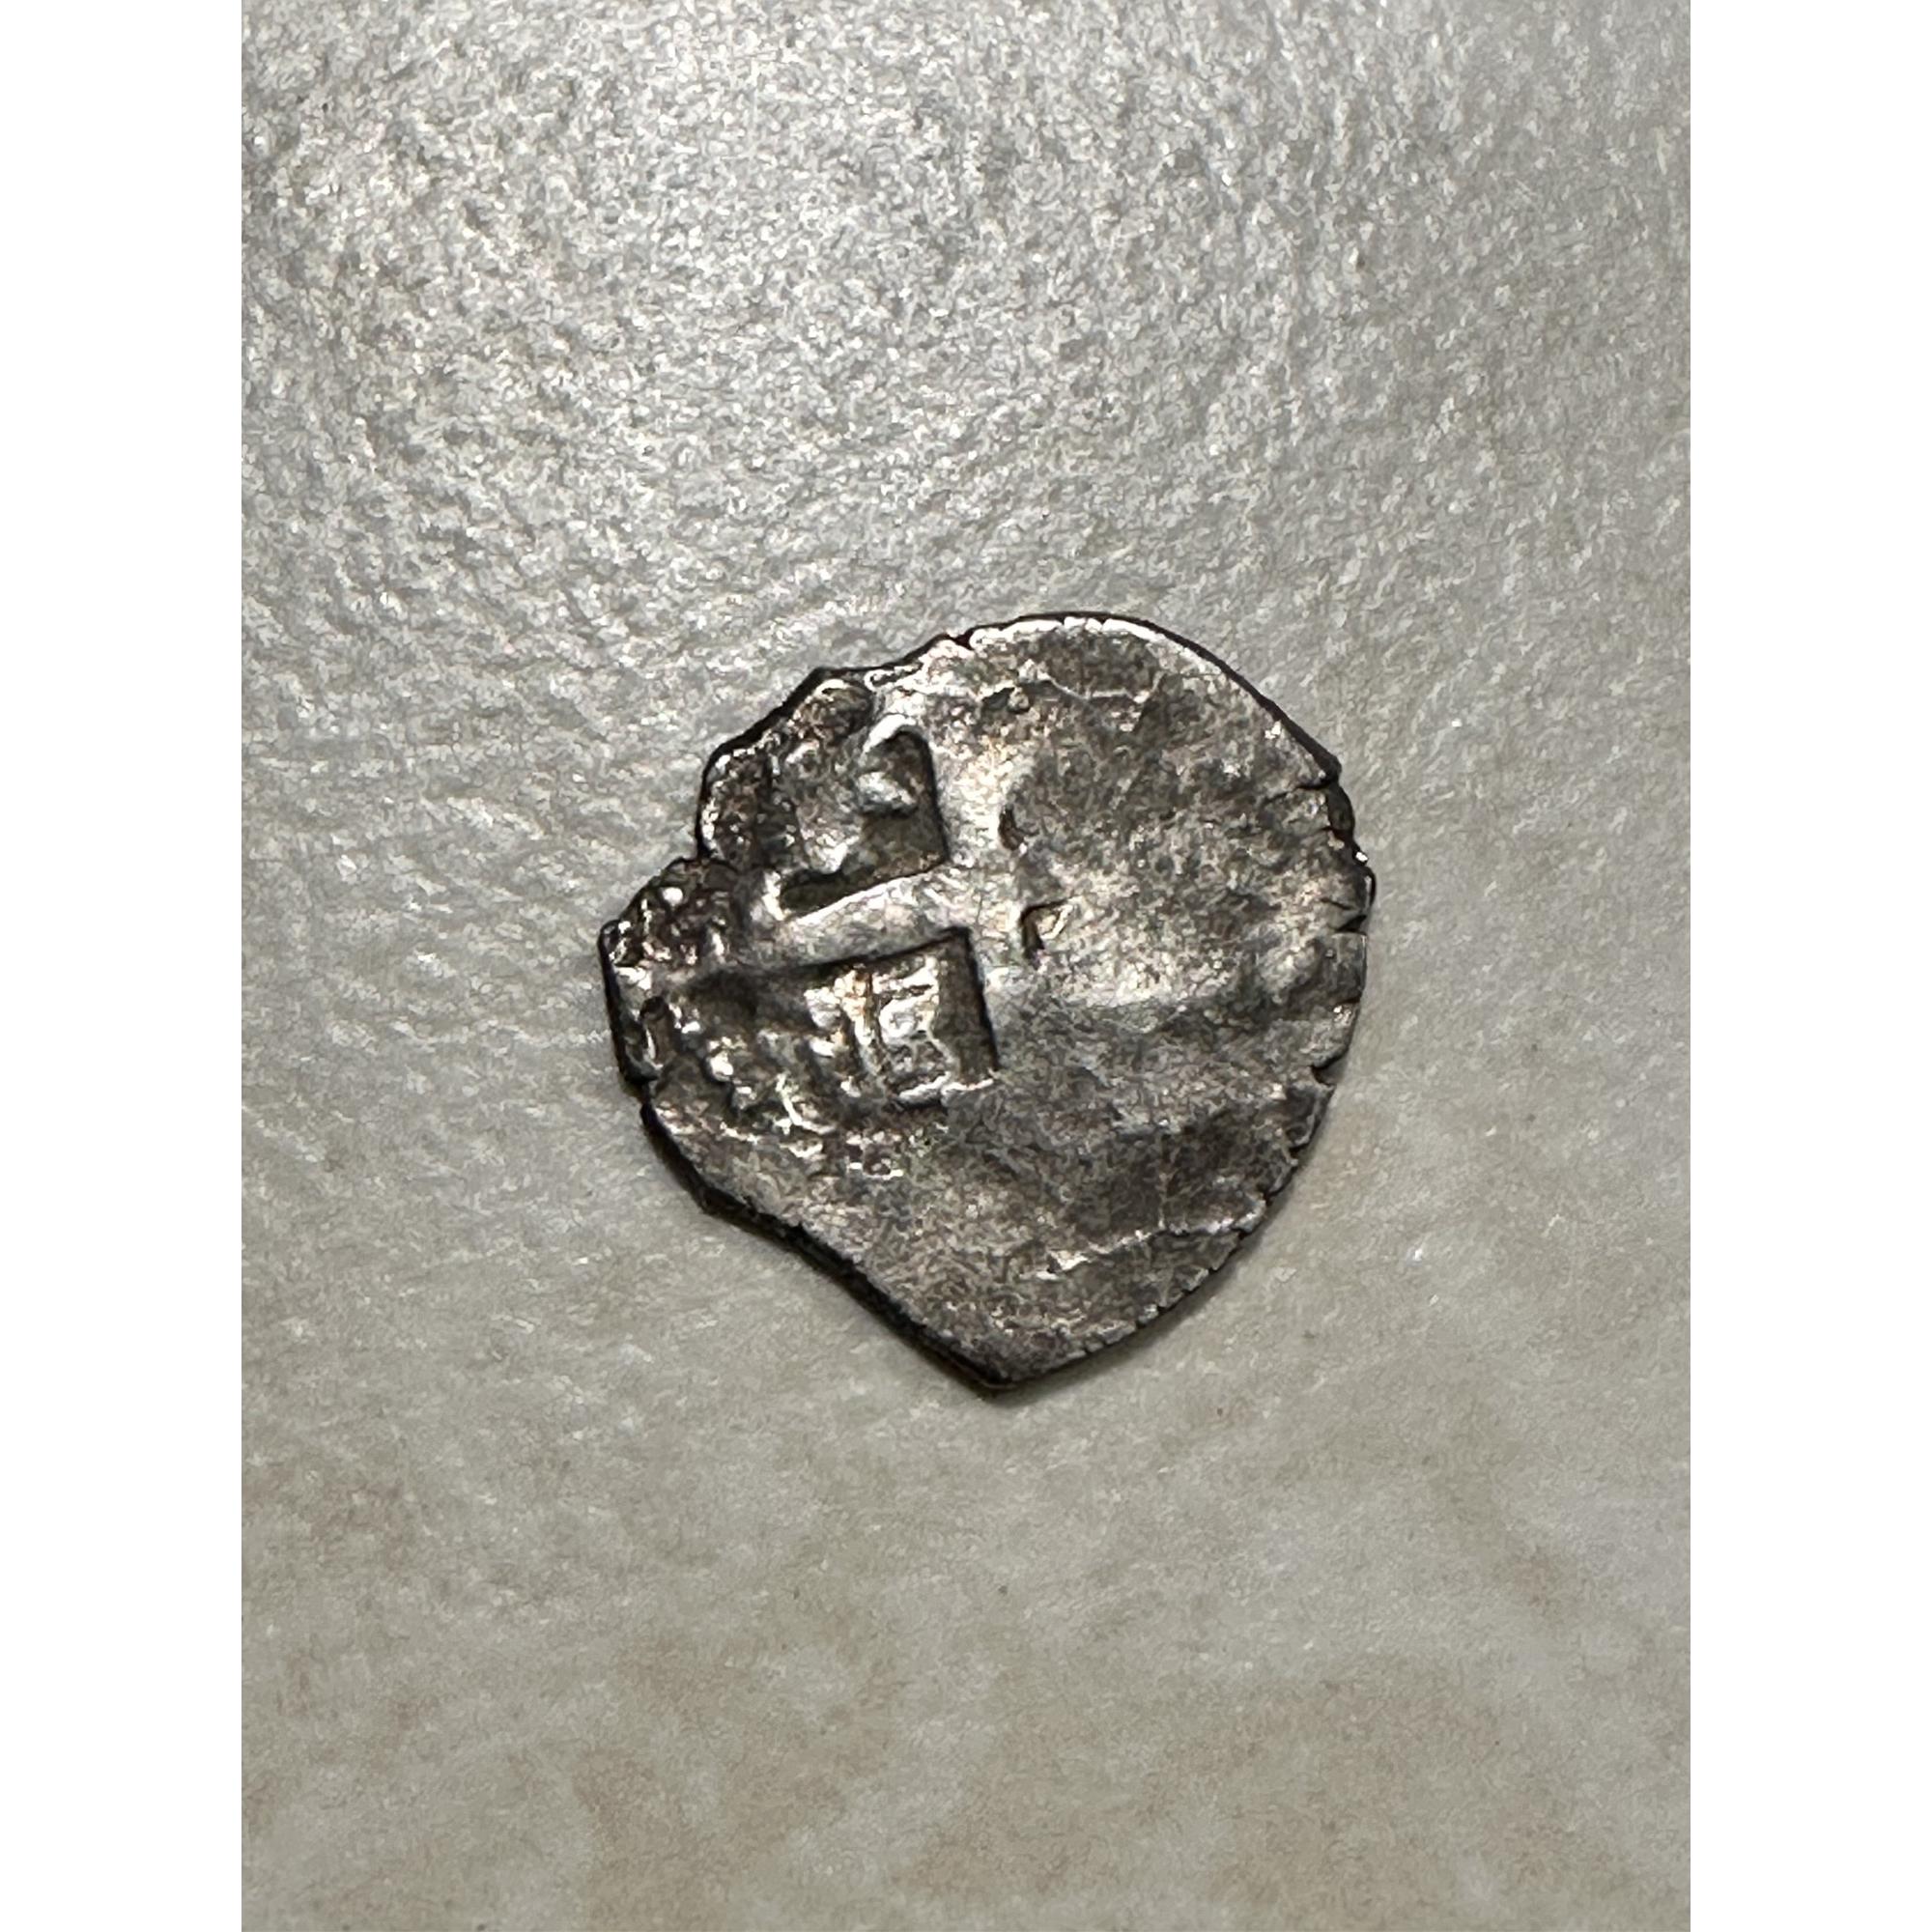 Shipwreck Silver 1 Reale, 2.3 grams, Minted in Lima Prehistoric Online